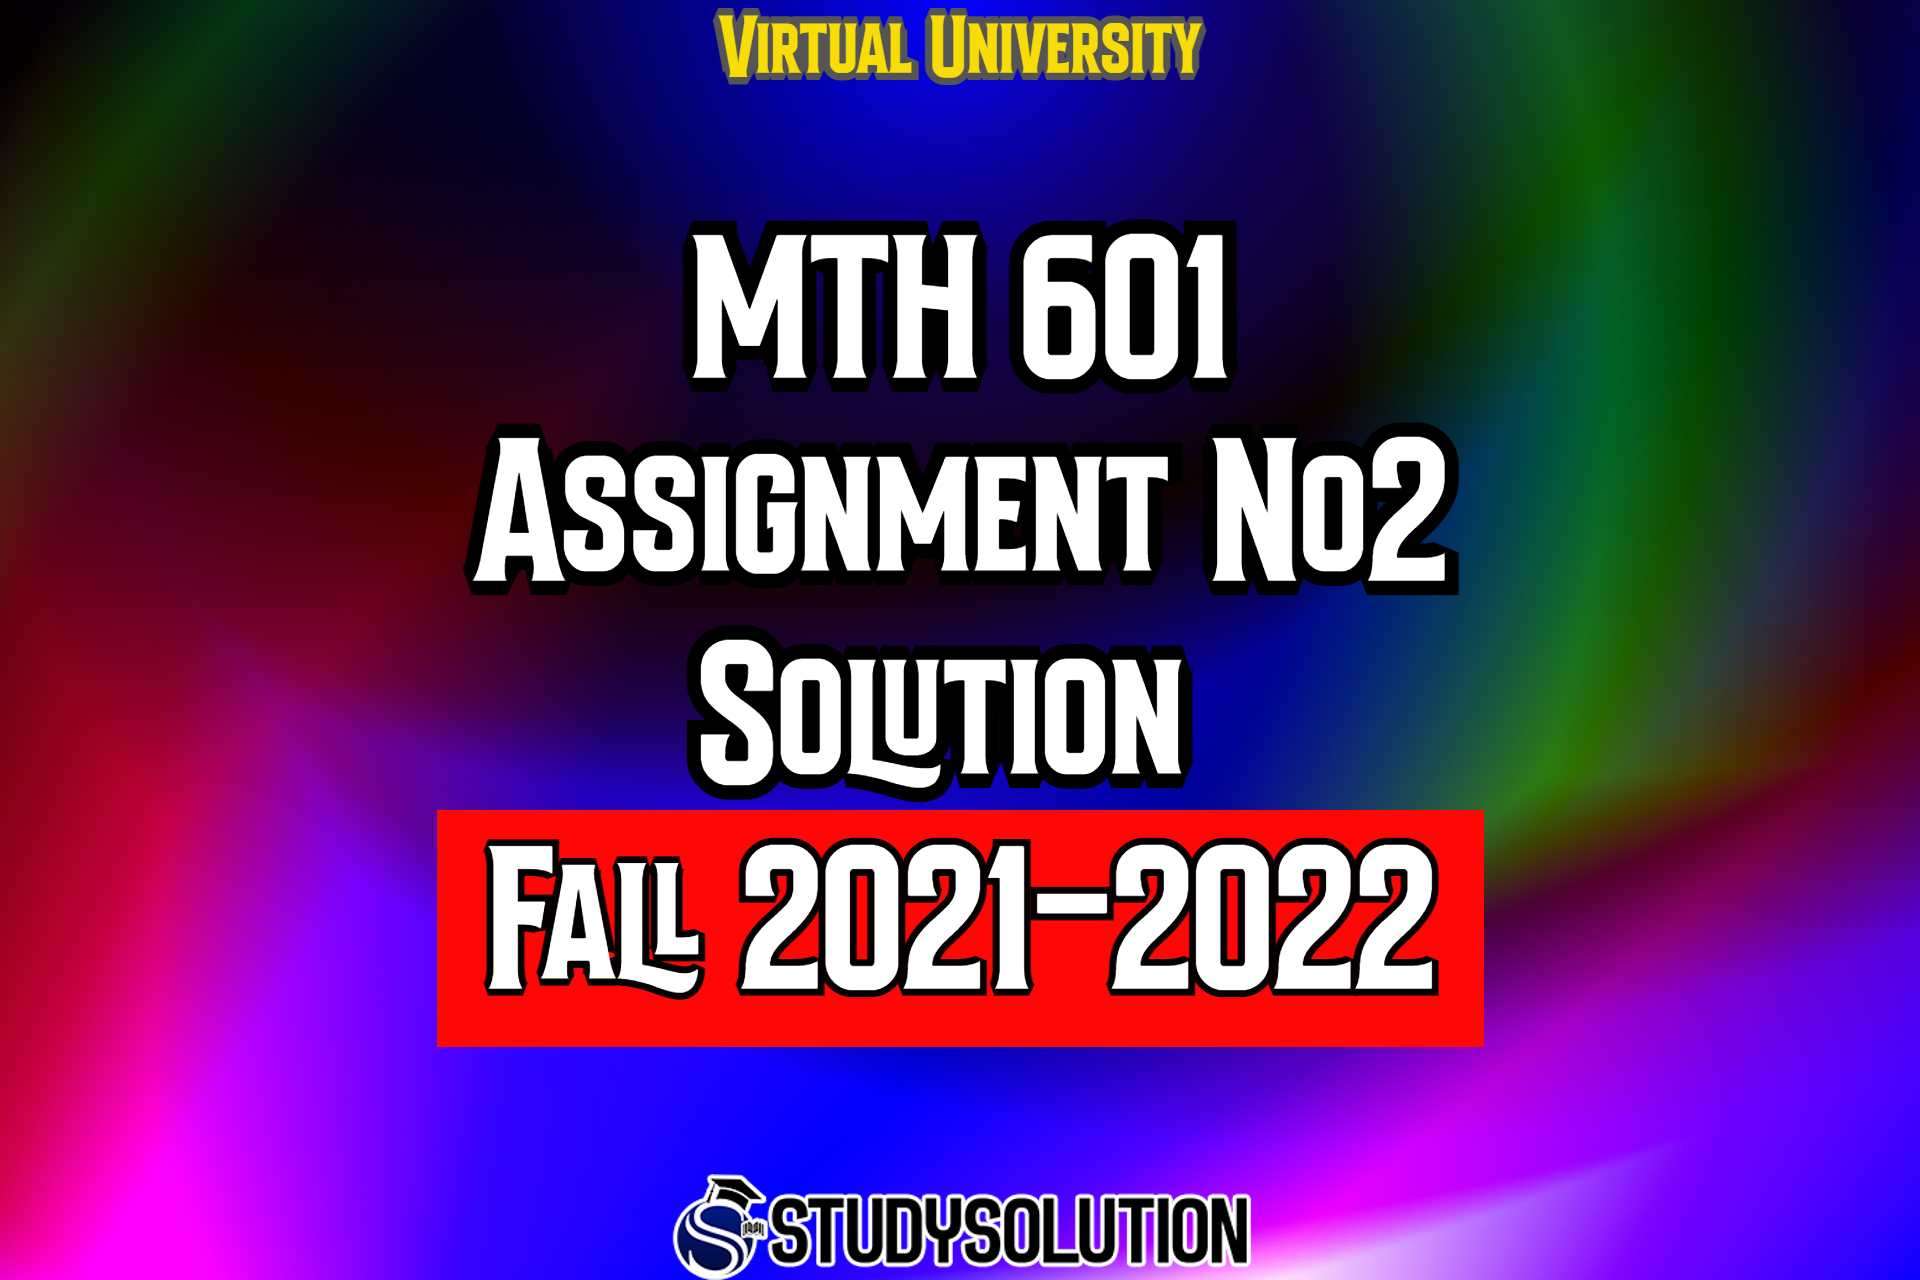 MTH601 Assignment No 2 Solution Fall 2022